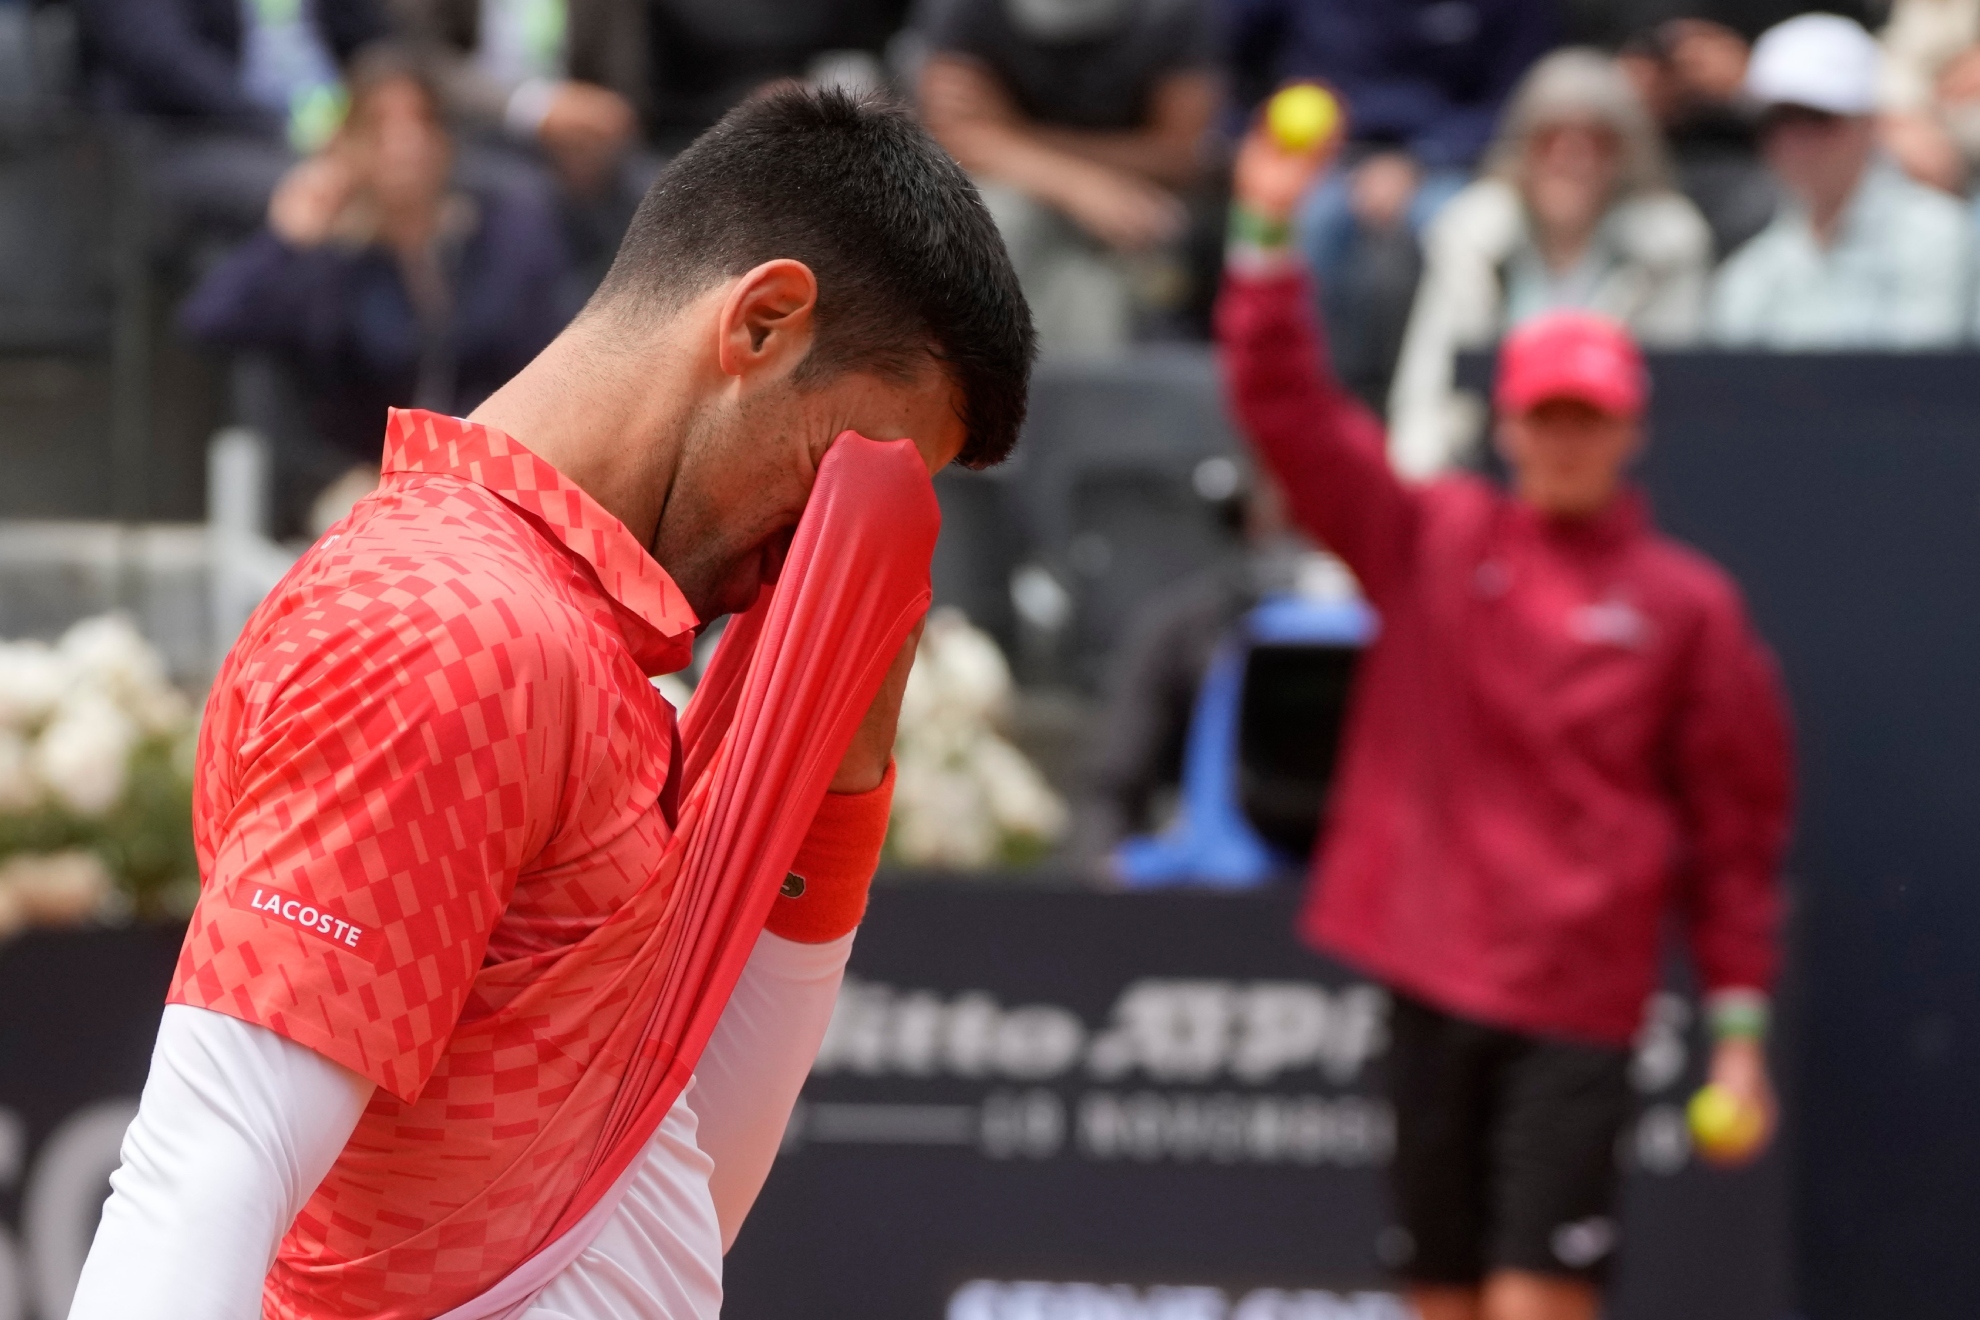 Denmark's Rune stuns Djokovic and knocks the Serb out of Rome Masters